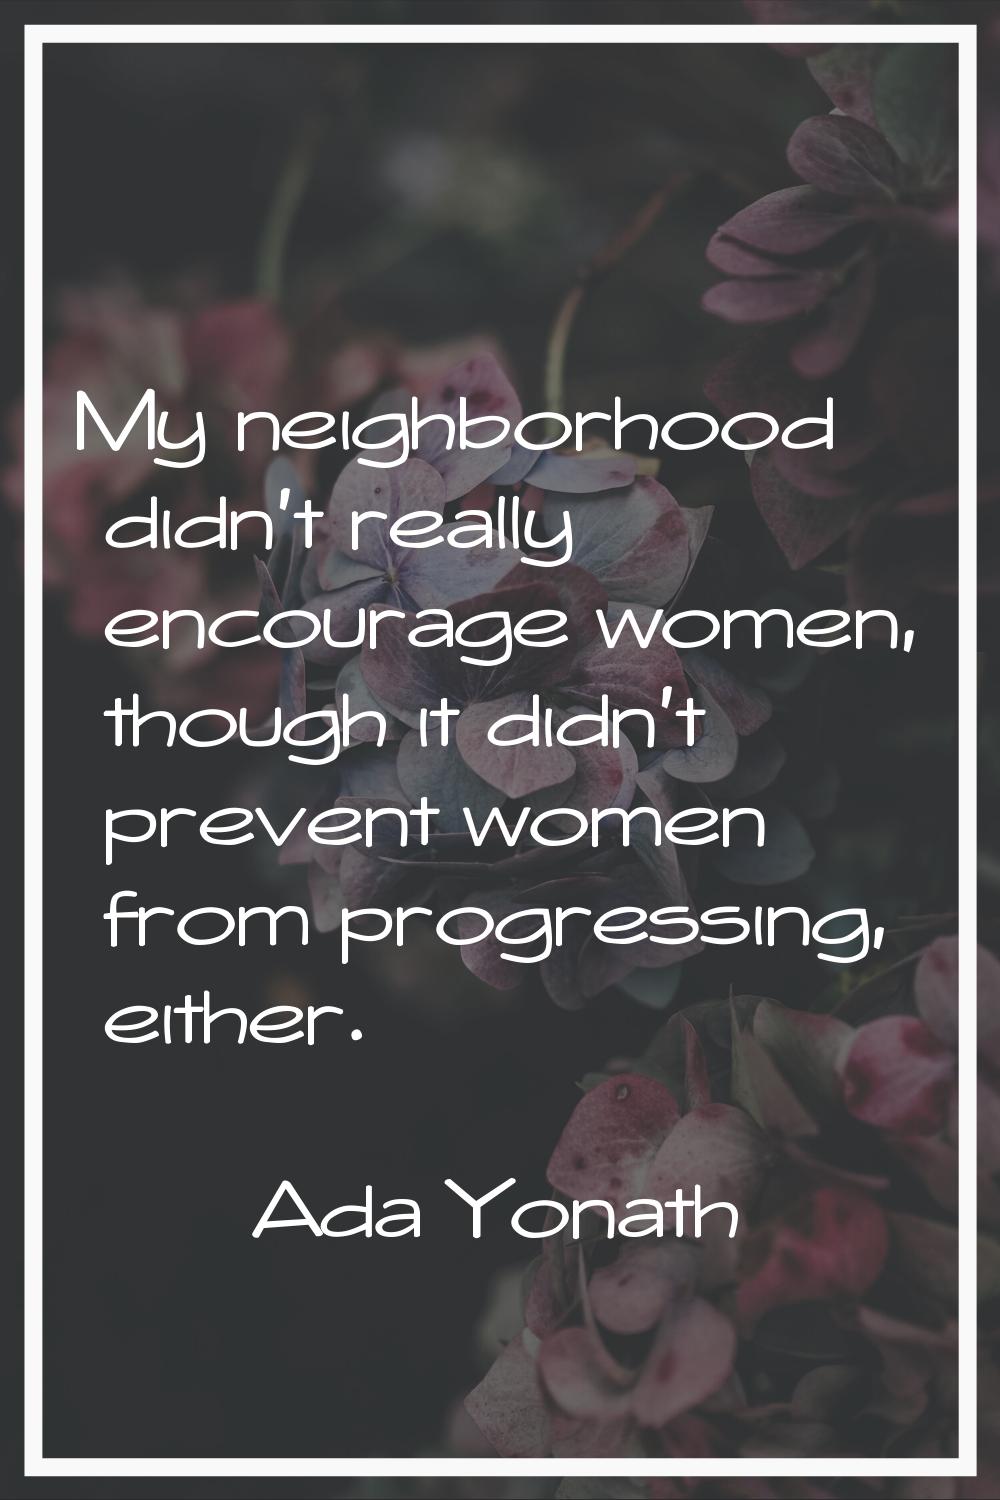 My neighborhood didn't really encourage women, though it didn't prevent women from progressing, eit